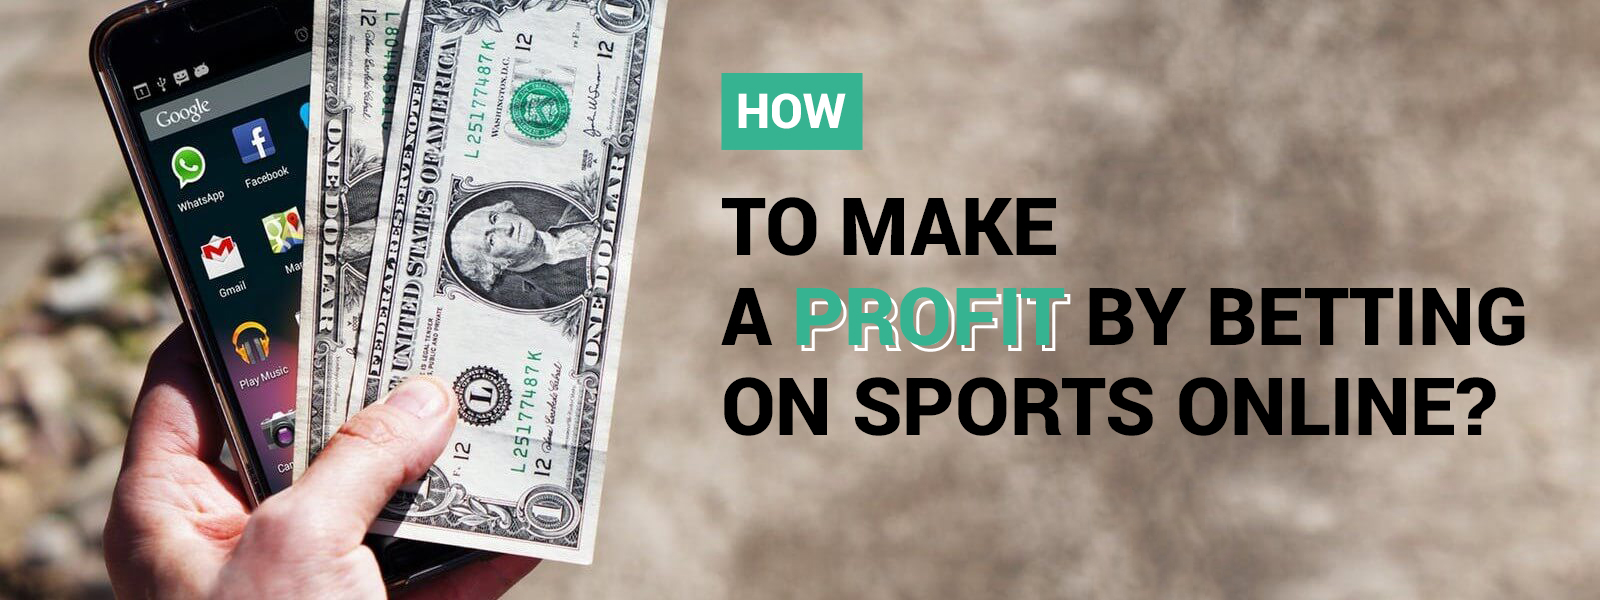 How To Make A Profit By Betting On Sports Online?